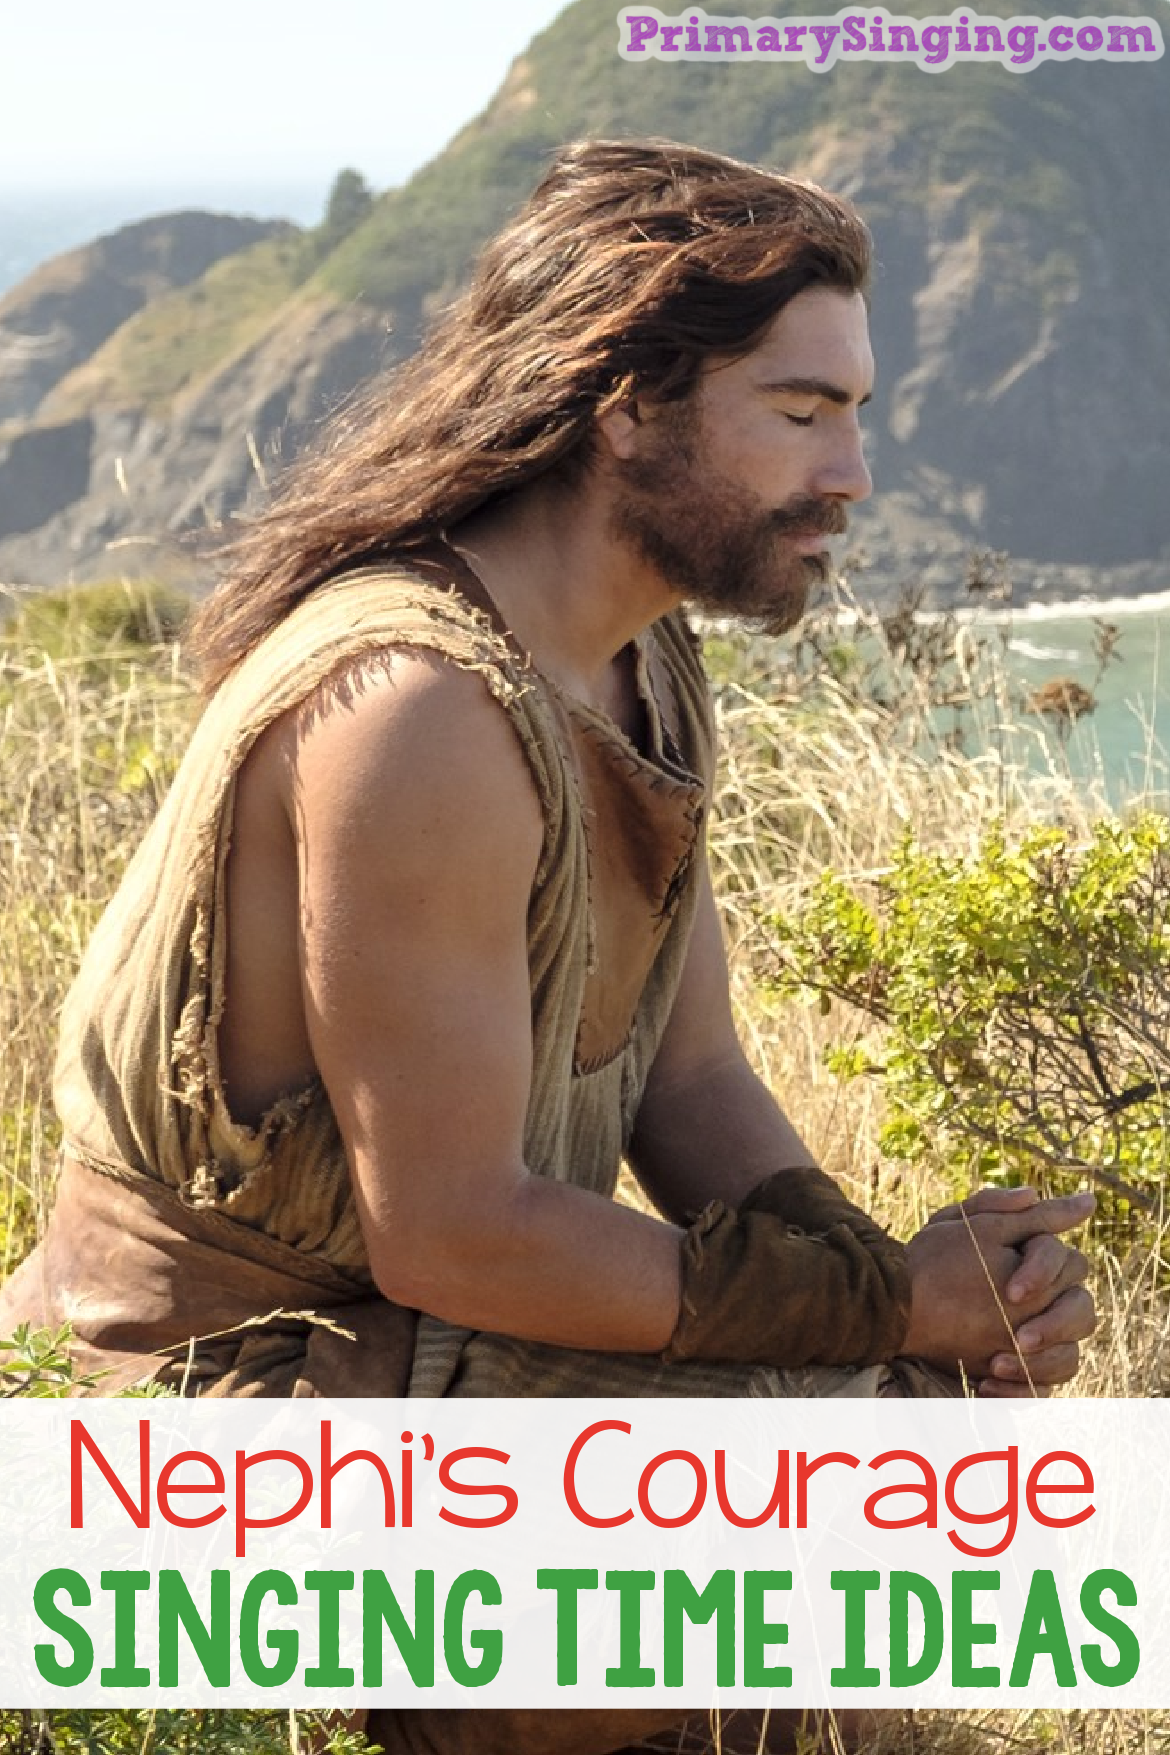 Teach Nephi's Courage with these fun and engaging Singing Time Ideas for LDS Primary Music Leaders - a fun assortment of activities and lesson plans.